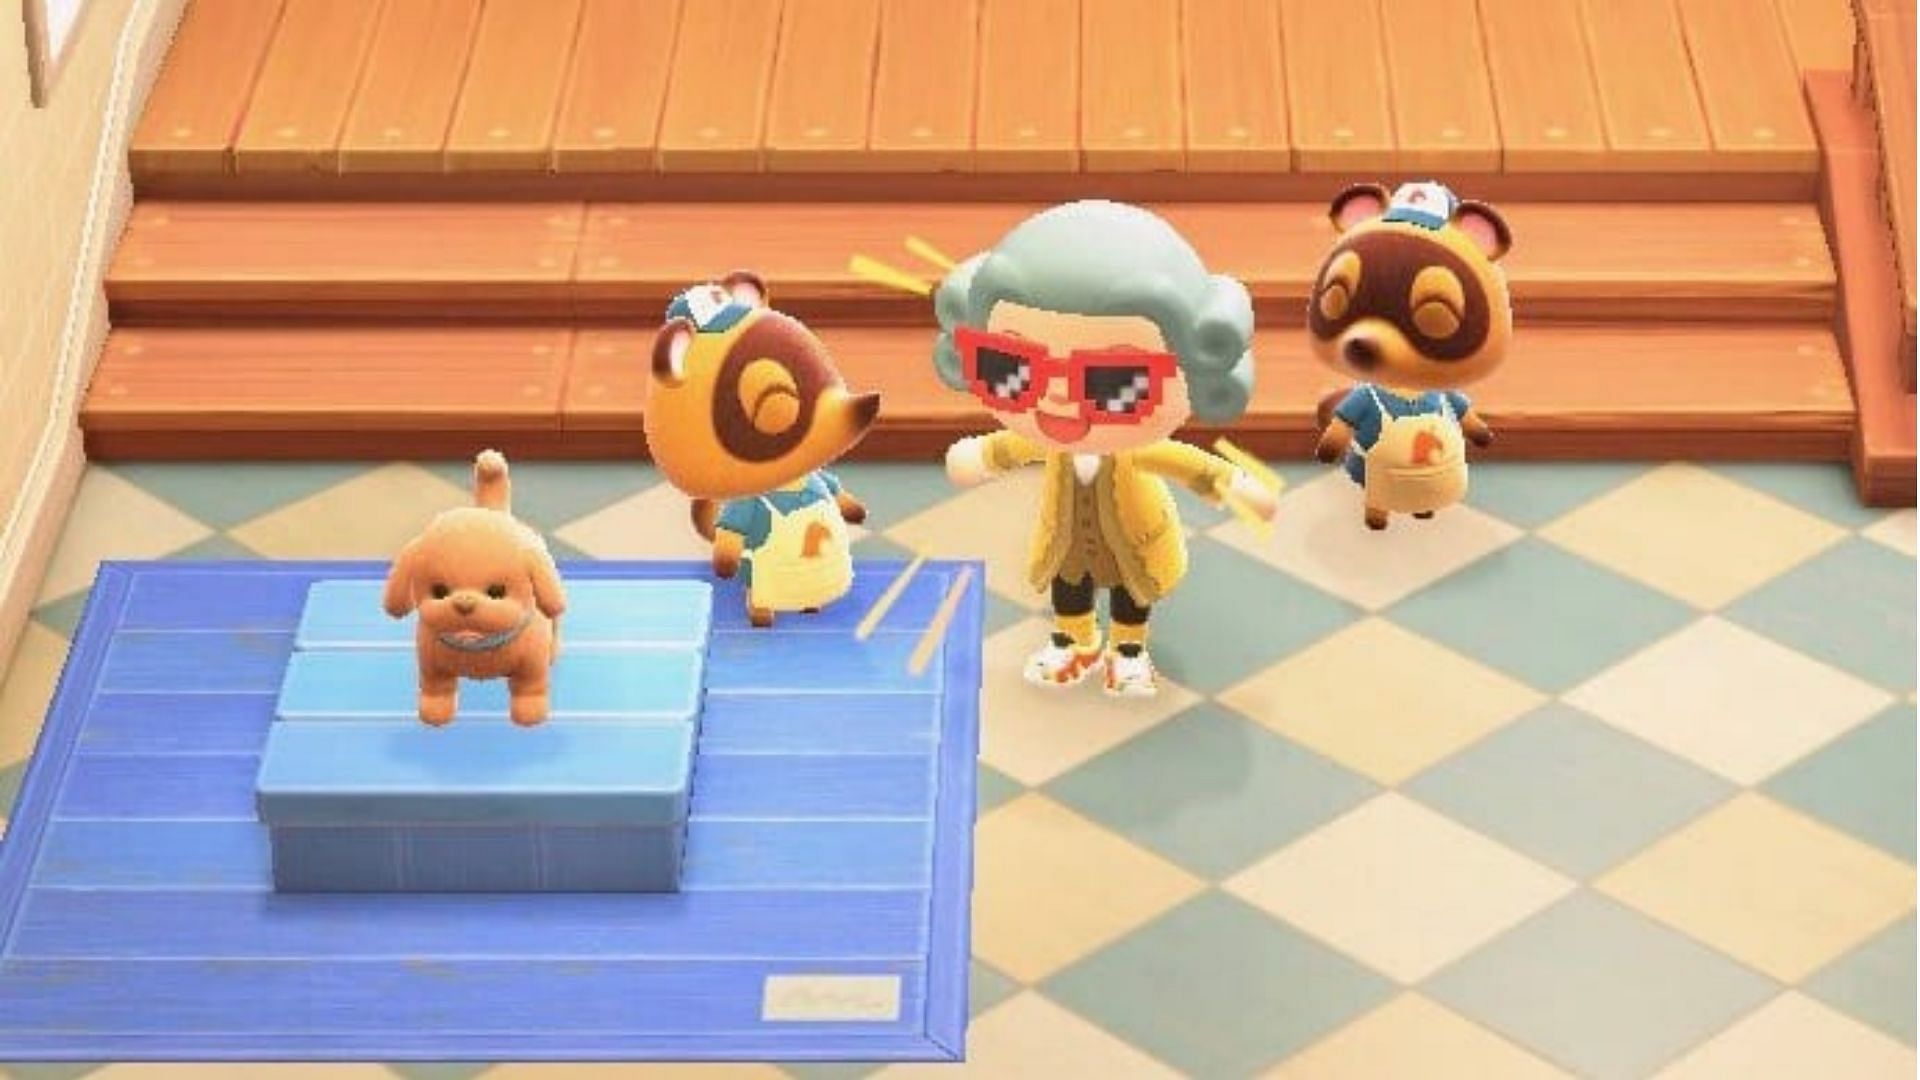 Animal Crossing: New Horizons players have devised a method to get pets in the game (Image via Twinfinite)